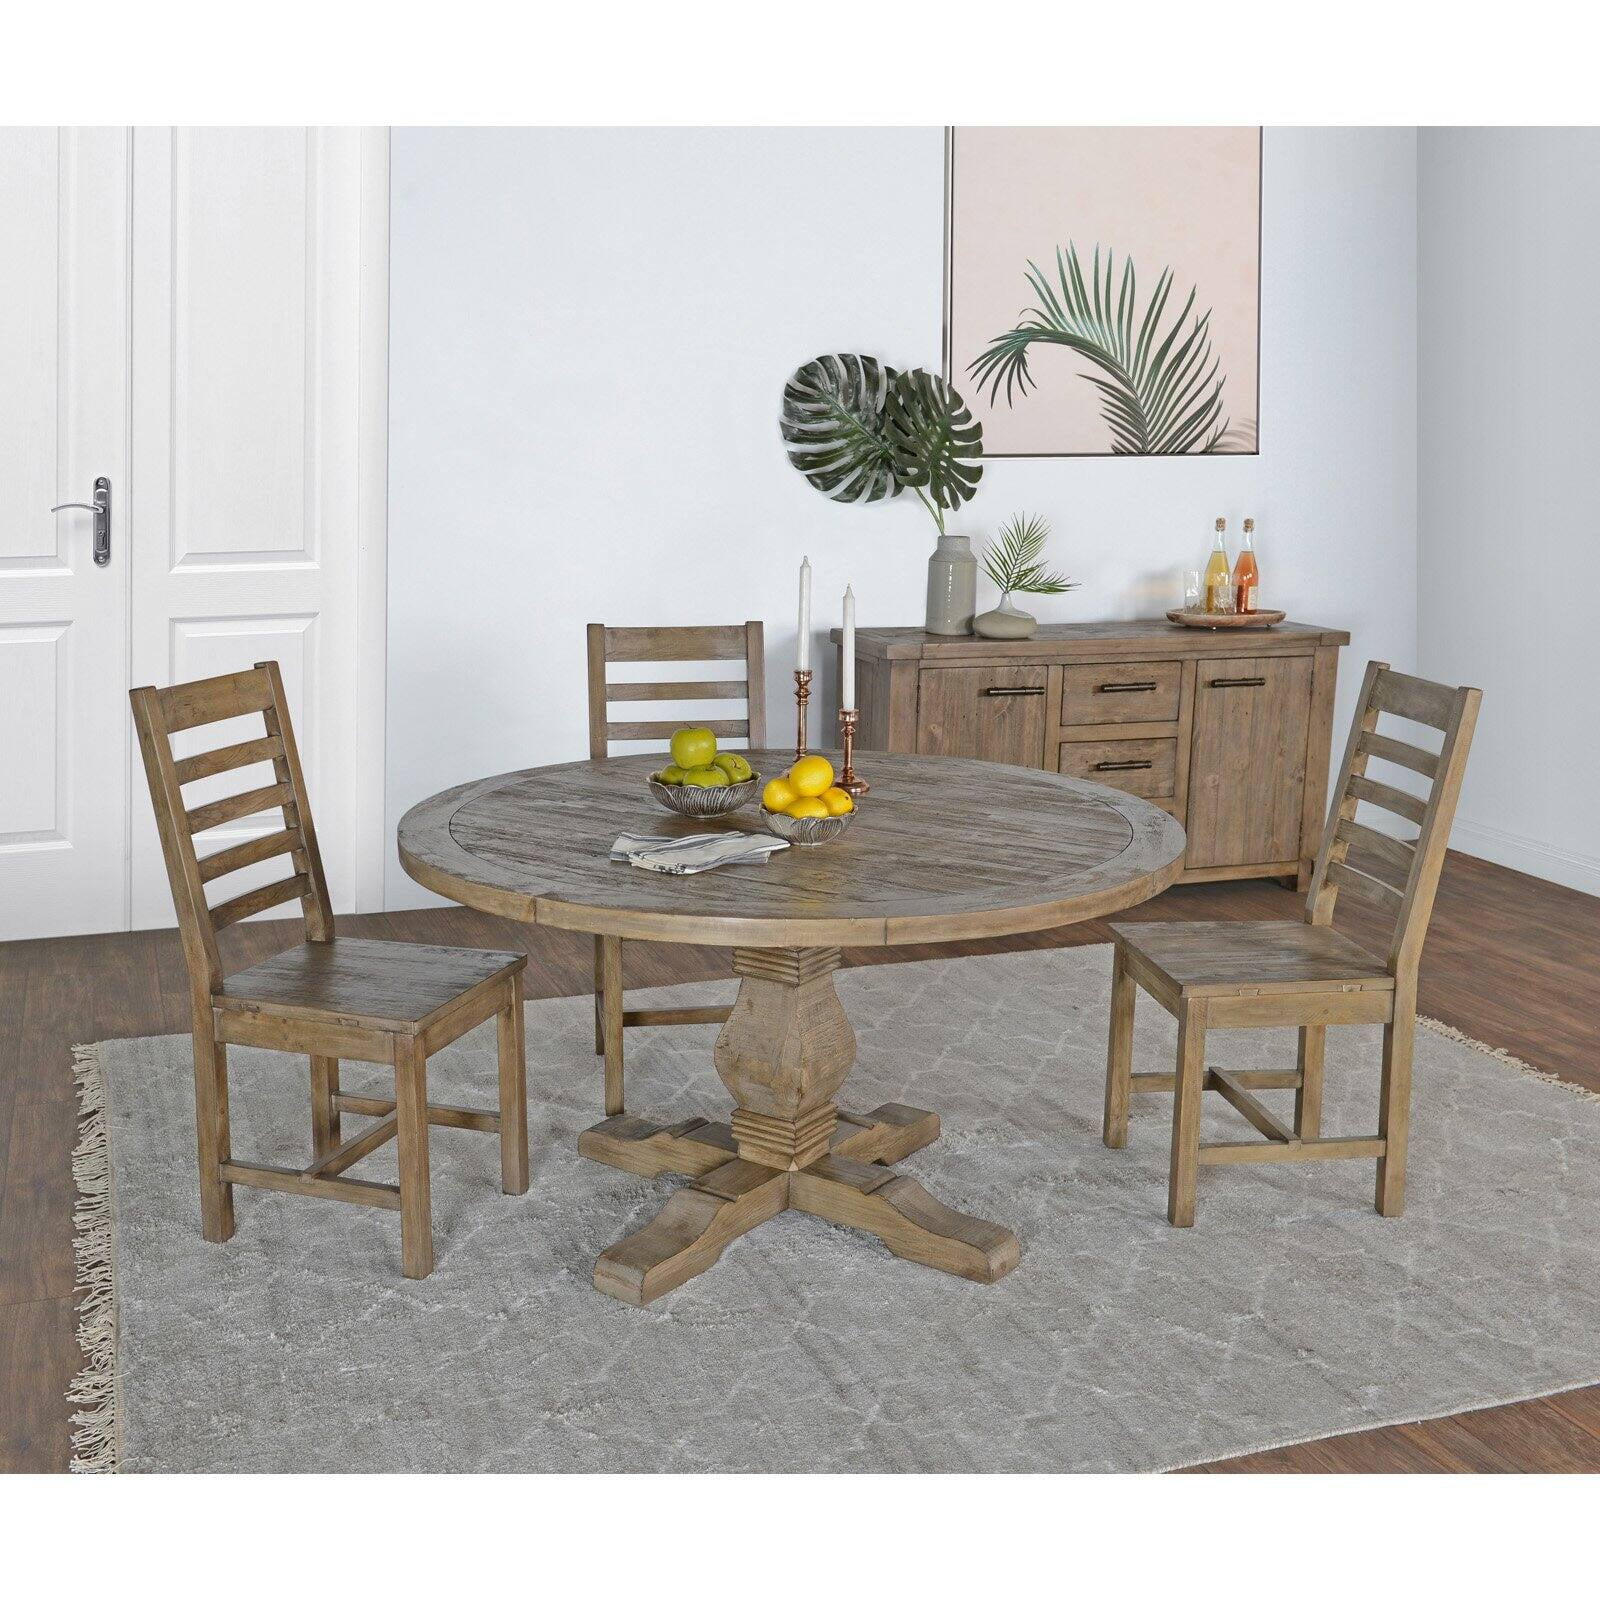 Kosas Home Quincy 55 In Round Dining, Reclaimed Pine Round Dining Table